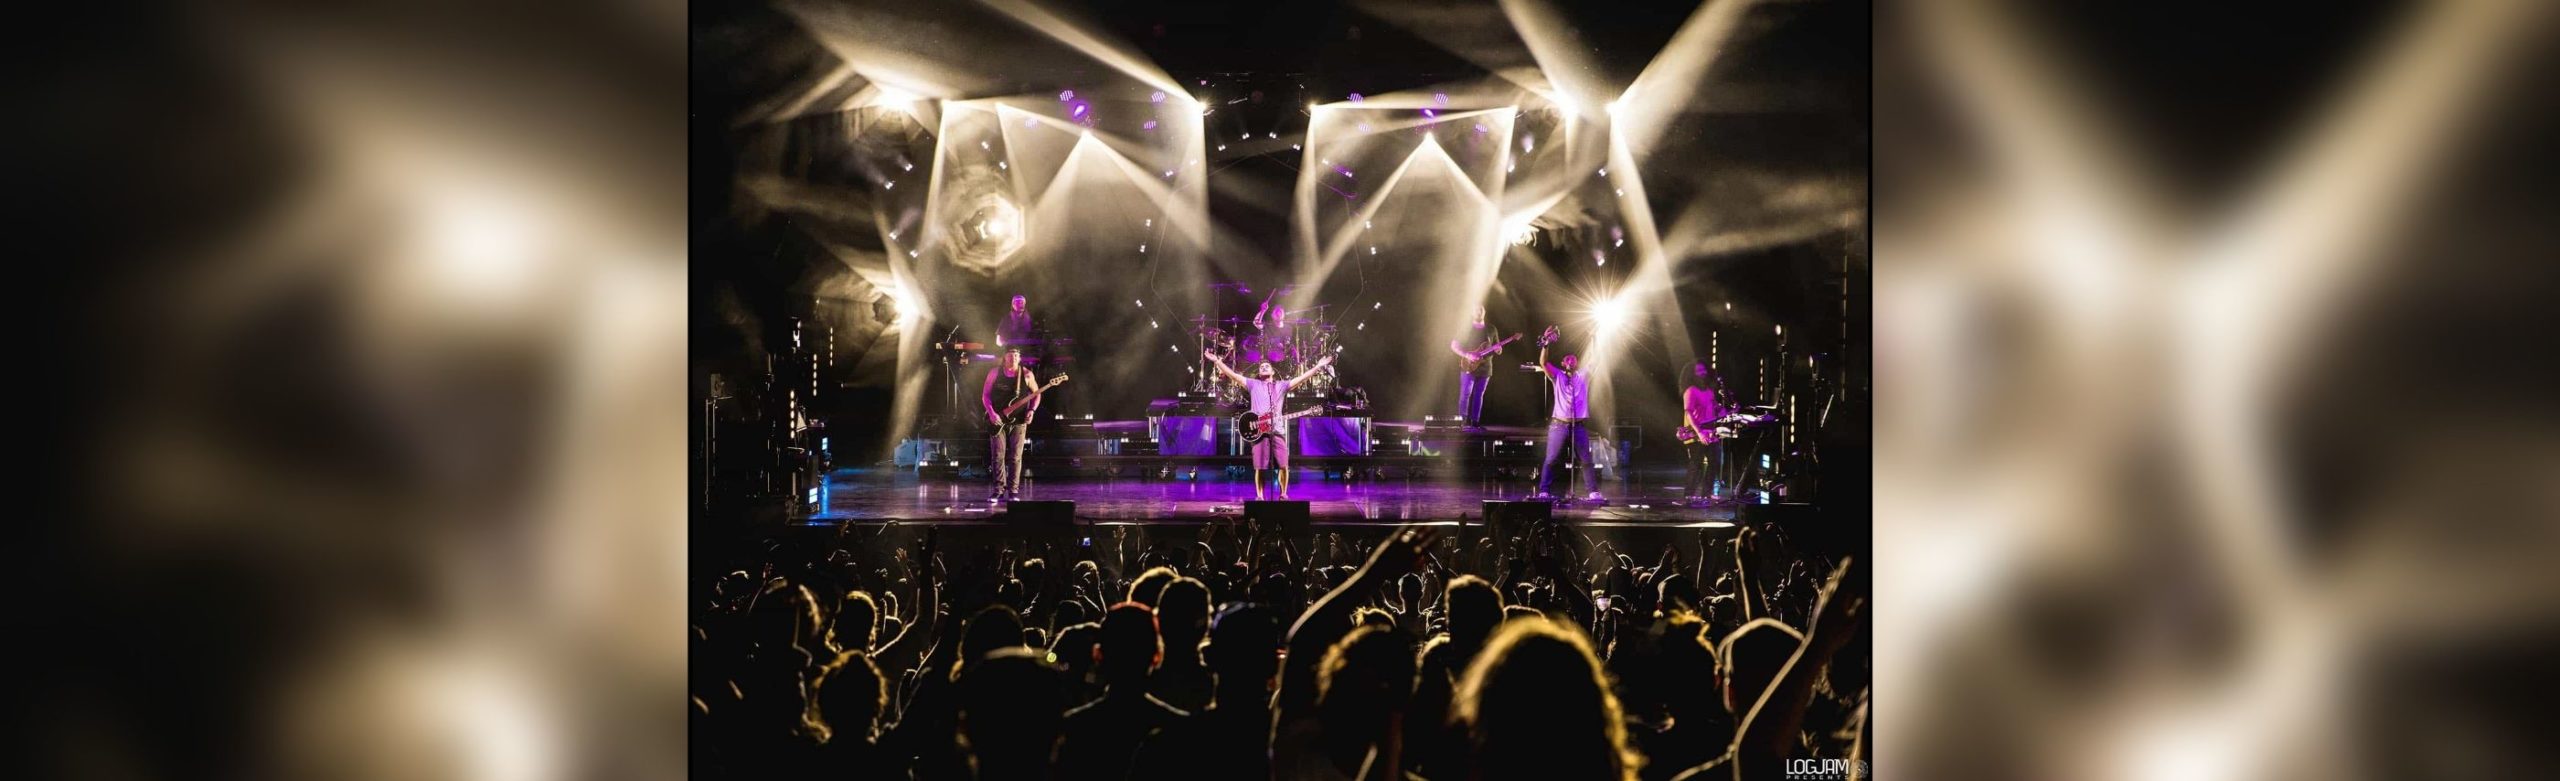 Win Tickets to Rebelution at KettleHouse Amphitheater and an Autographed Merch Bundle Image